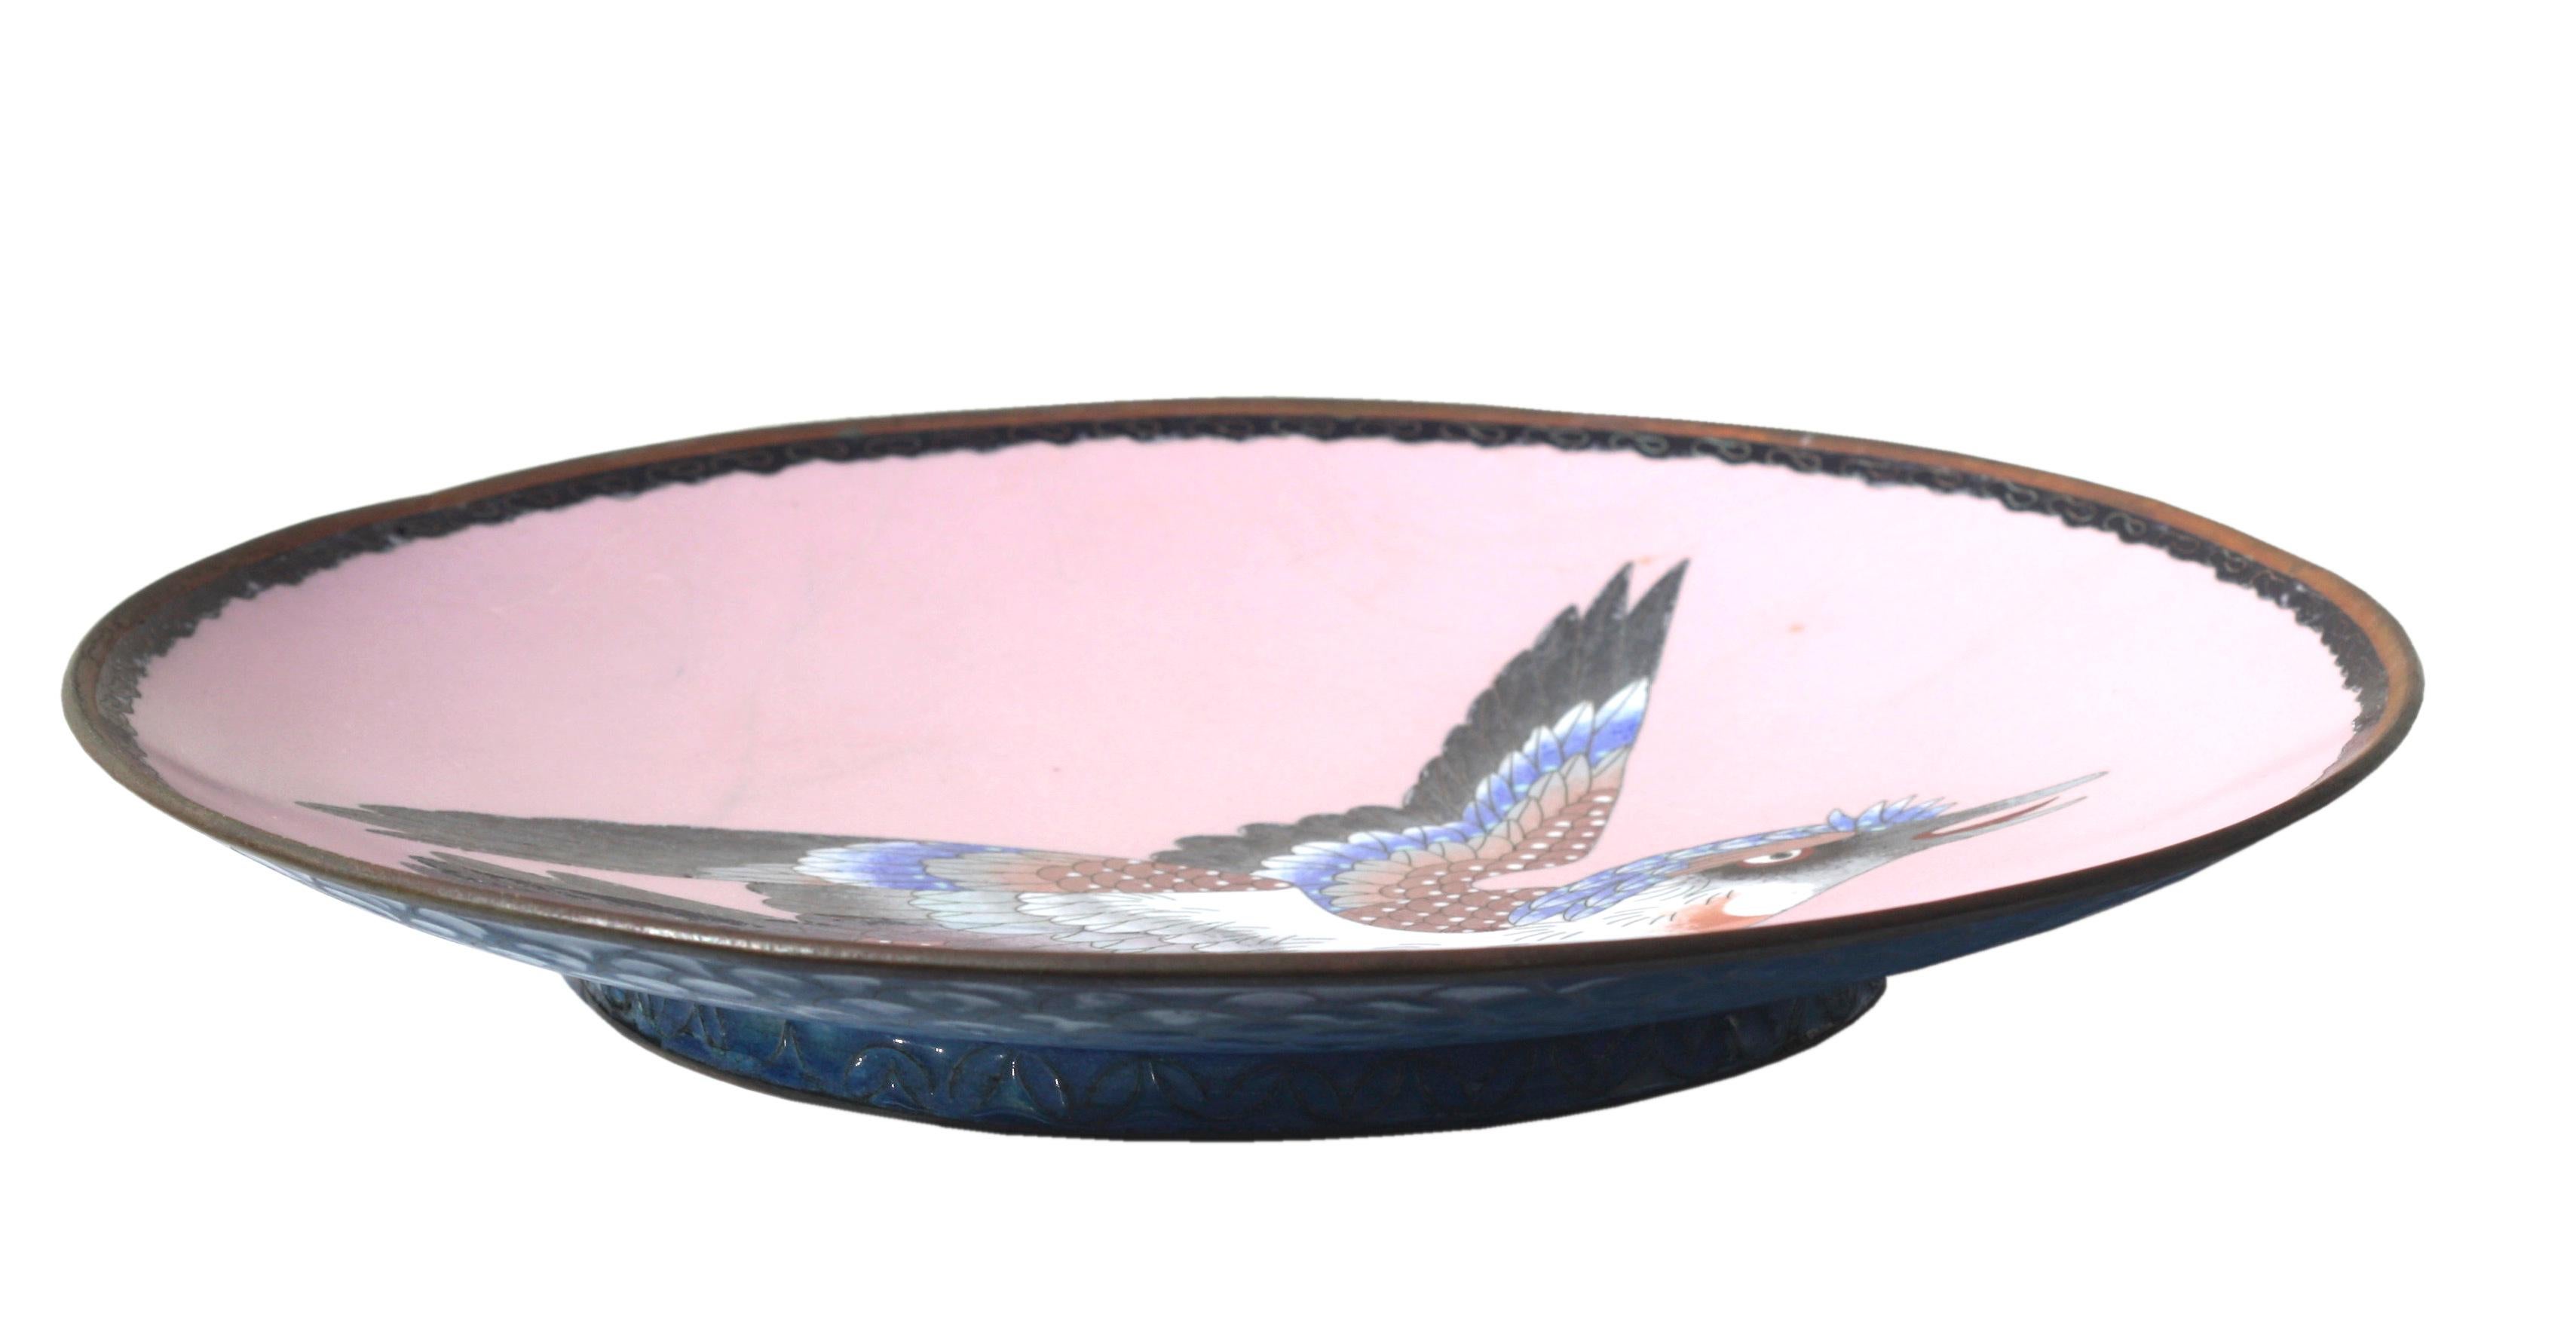 
A Cloisonne Dish
Meiji period (1868-1912)
decorated with a lively Falcon reserved on a light pink ground
diameter 11 3/4 inches